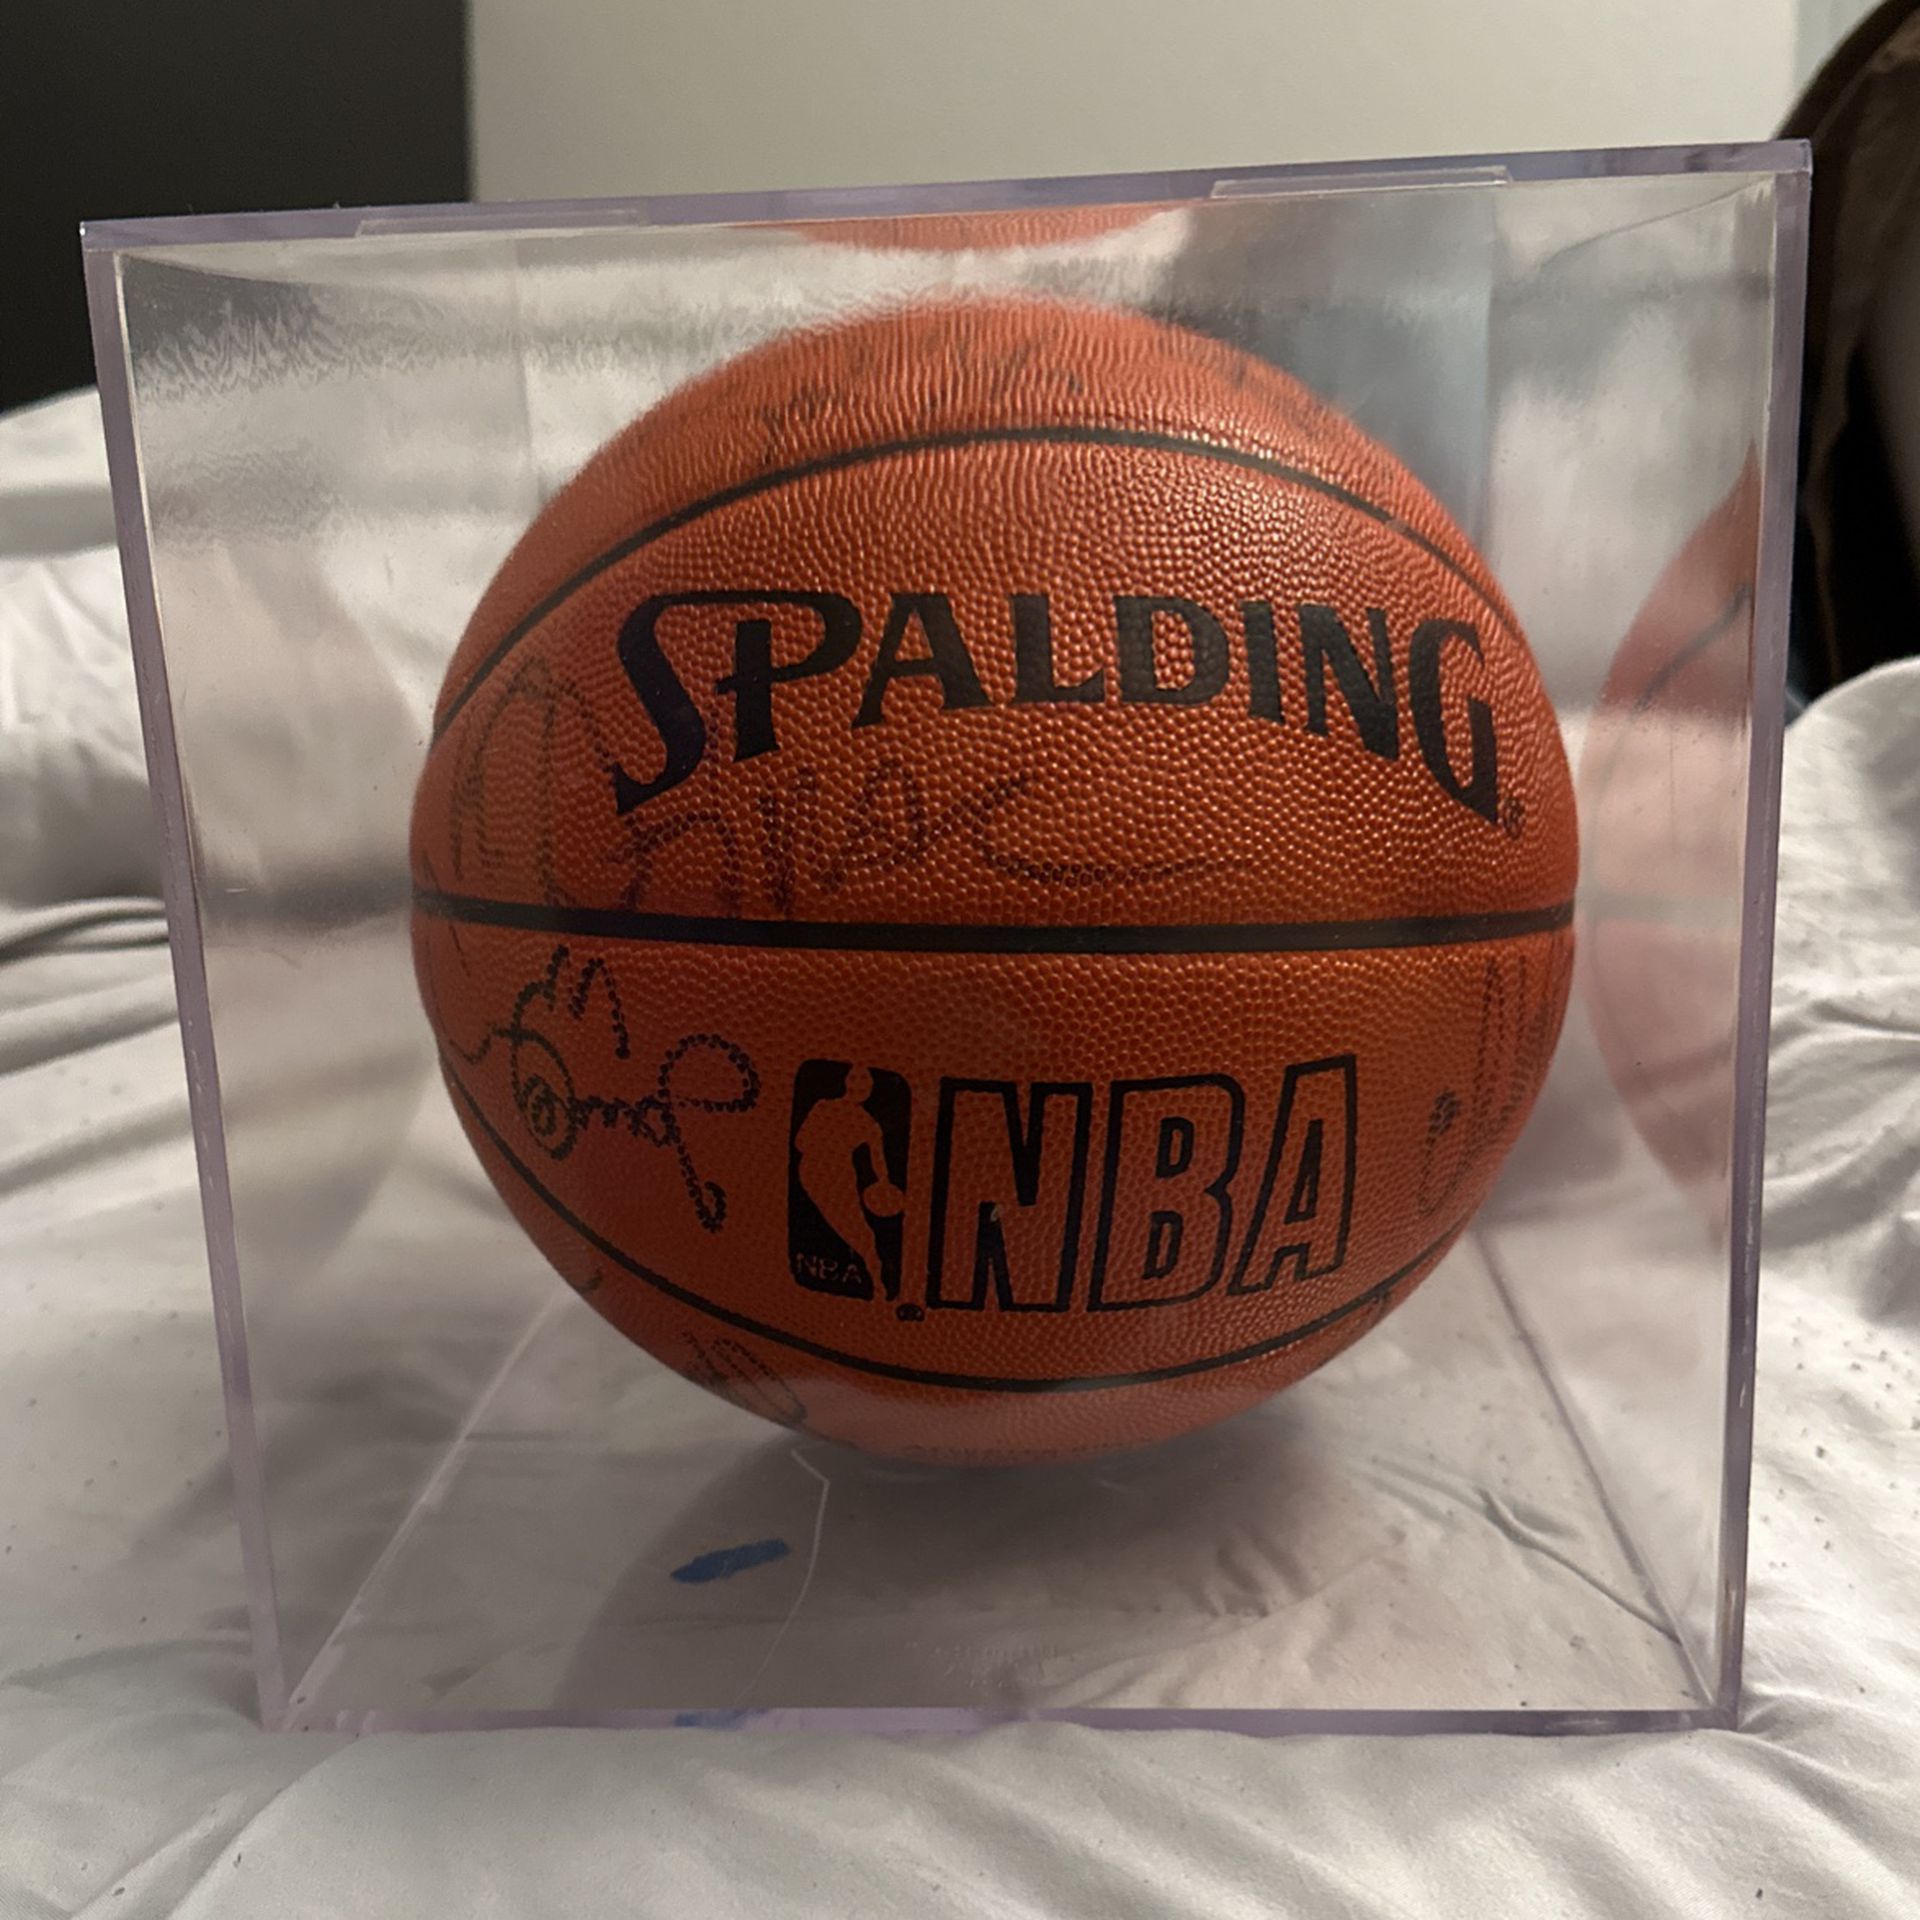 OFFICIAL NBA GAME BALL SIGNED BY 1(contact info removed) LAKERS CHAMPIONSHIP TEAM